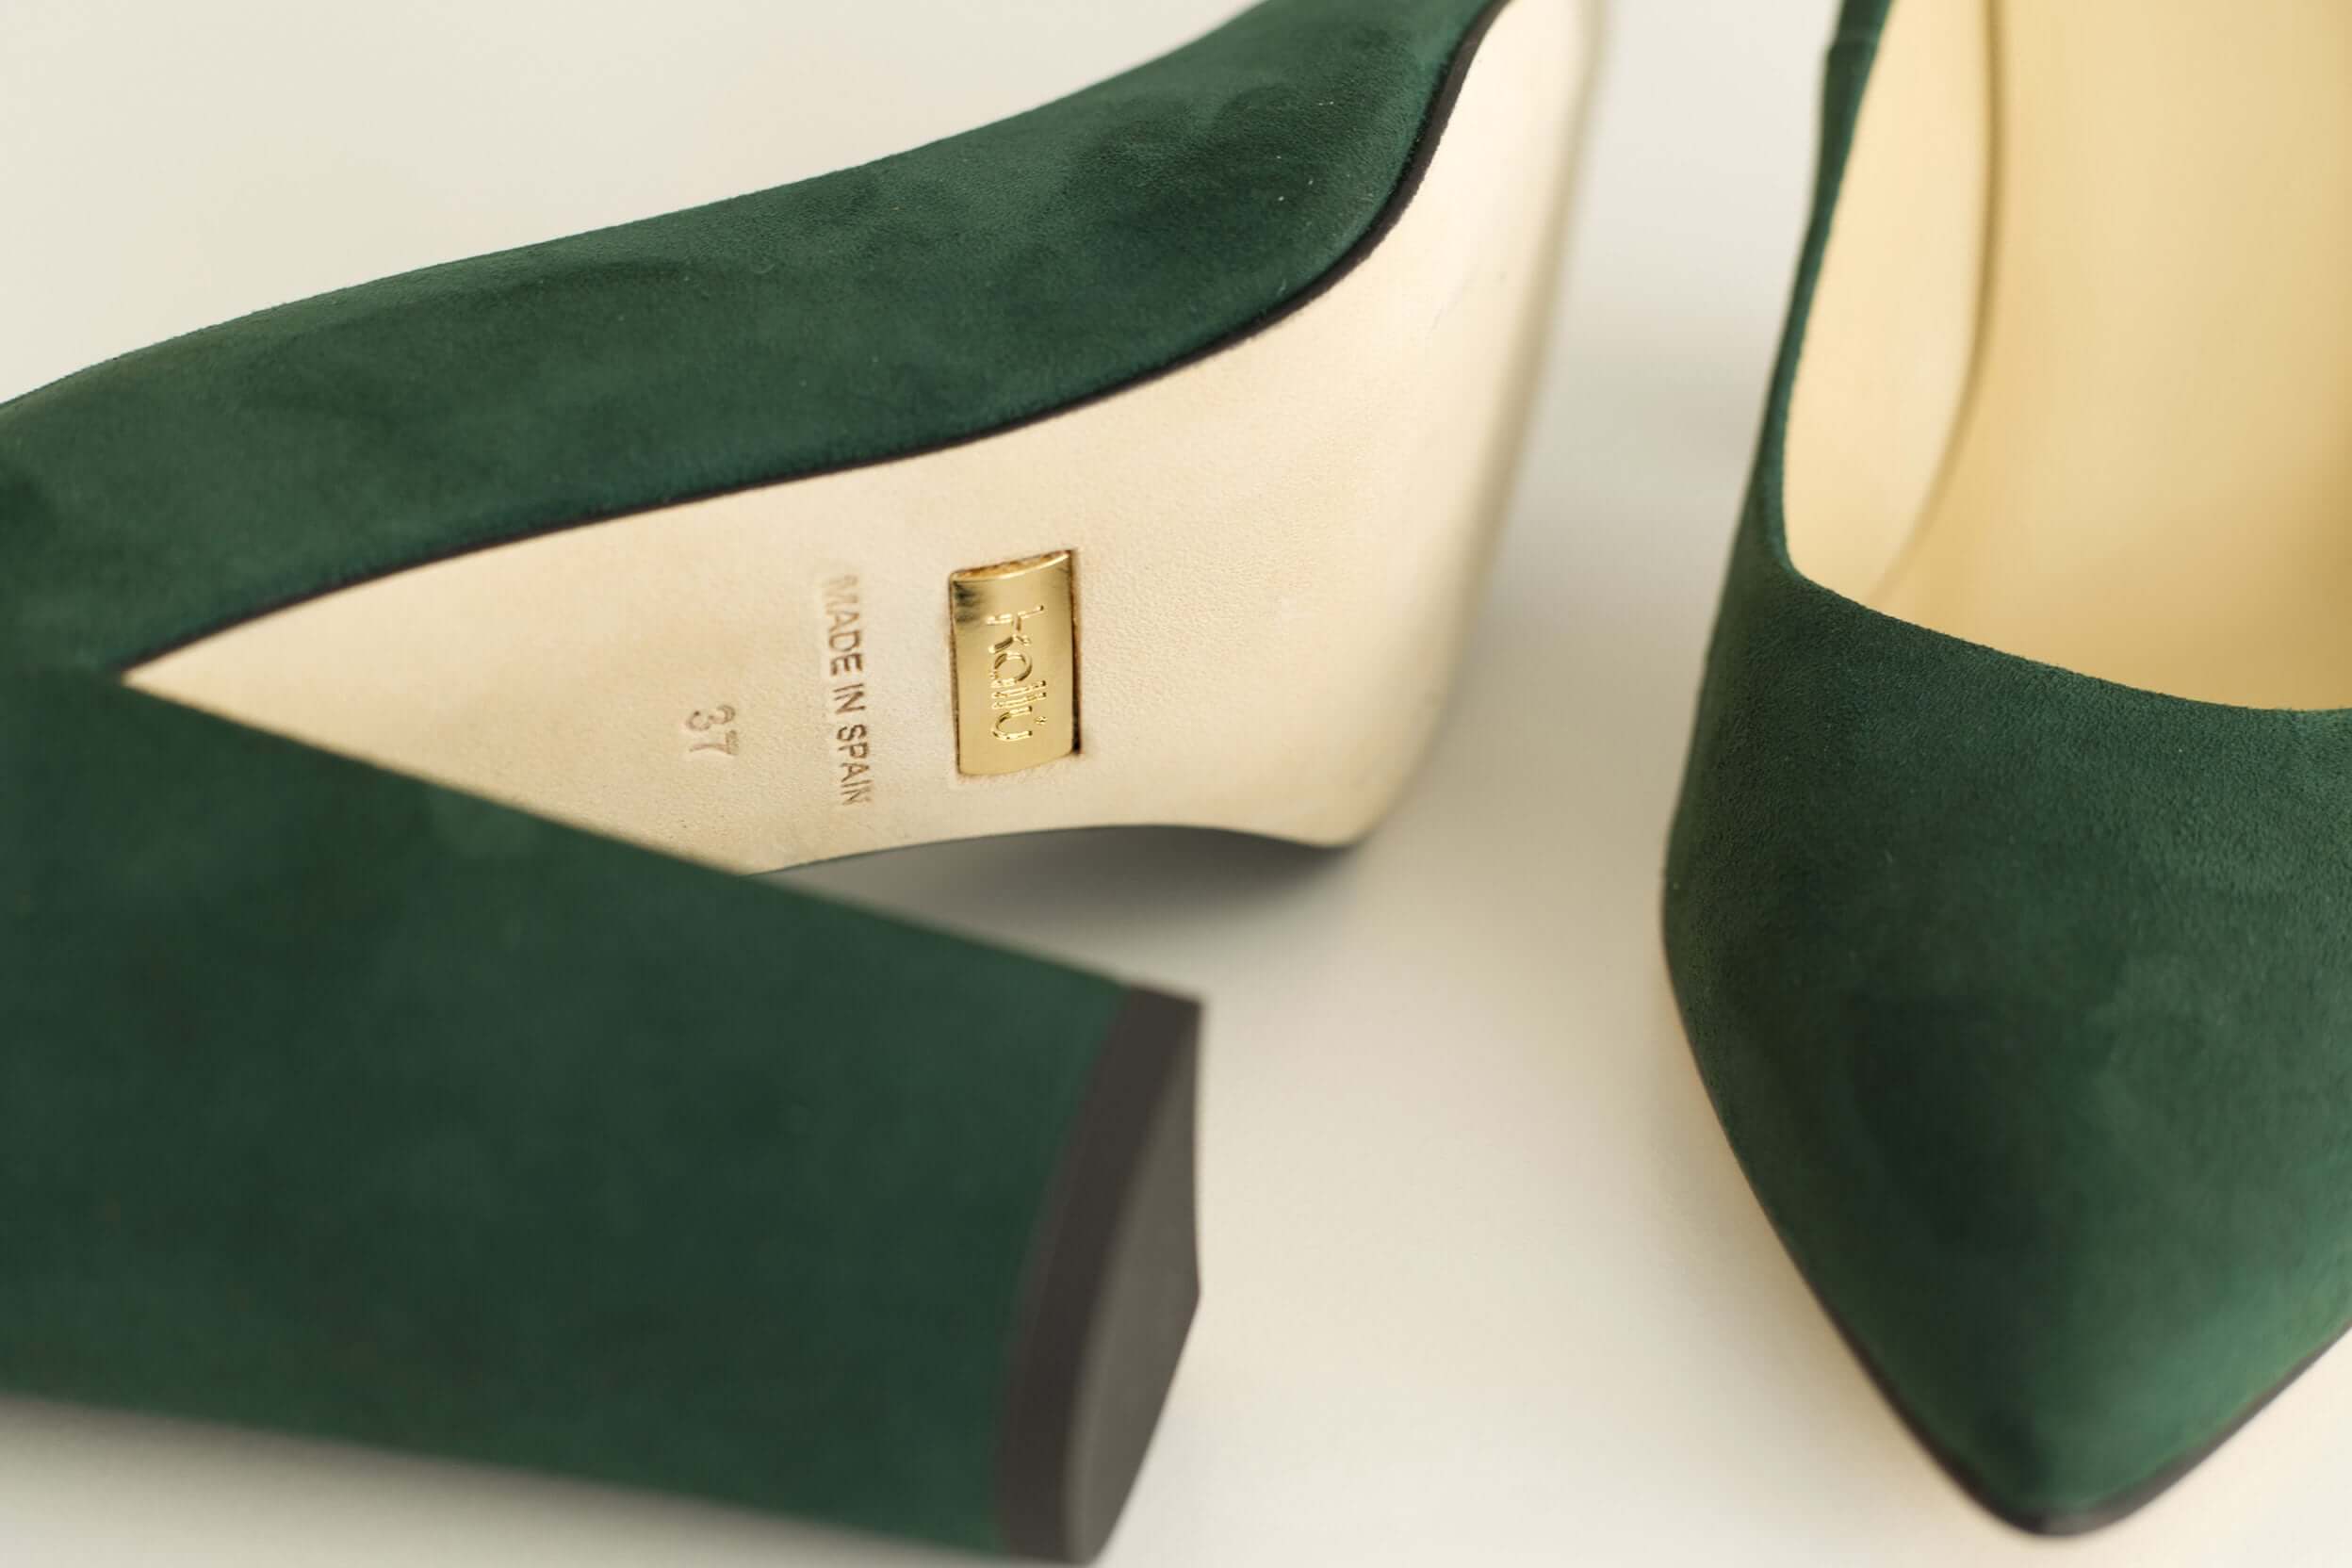 kallú-kallu-green-leather-pums-shoes-made-in-spain-for-women